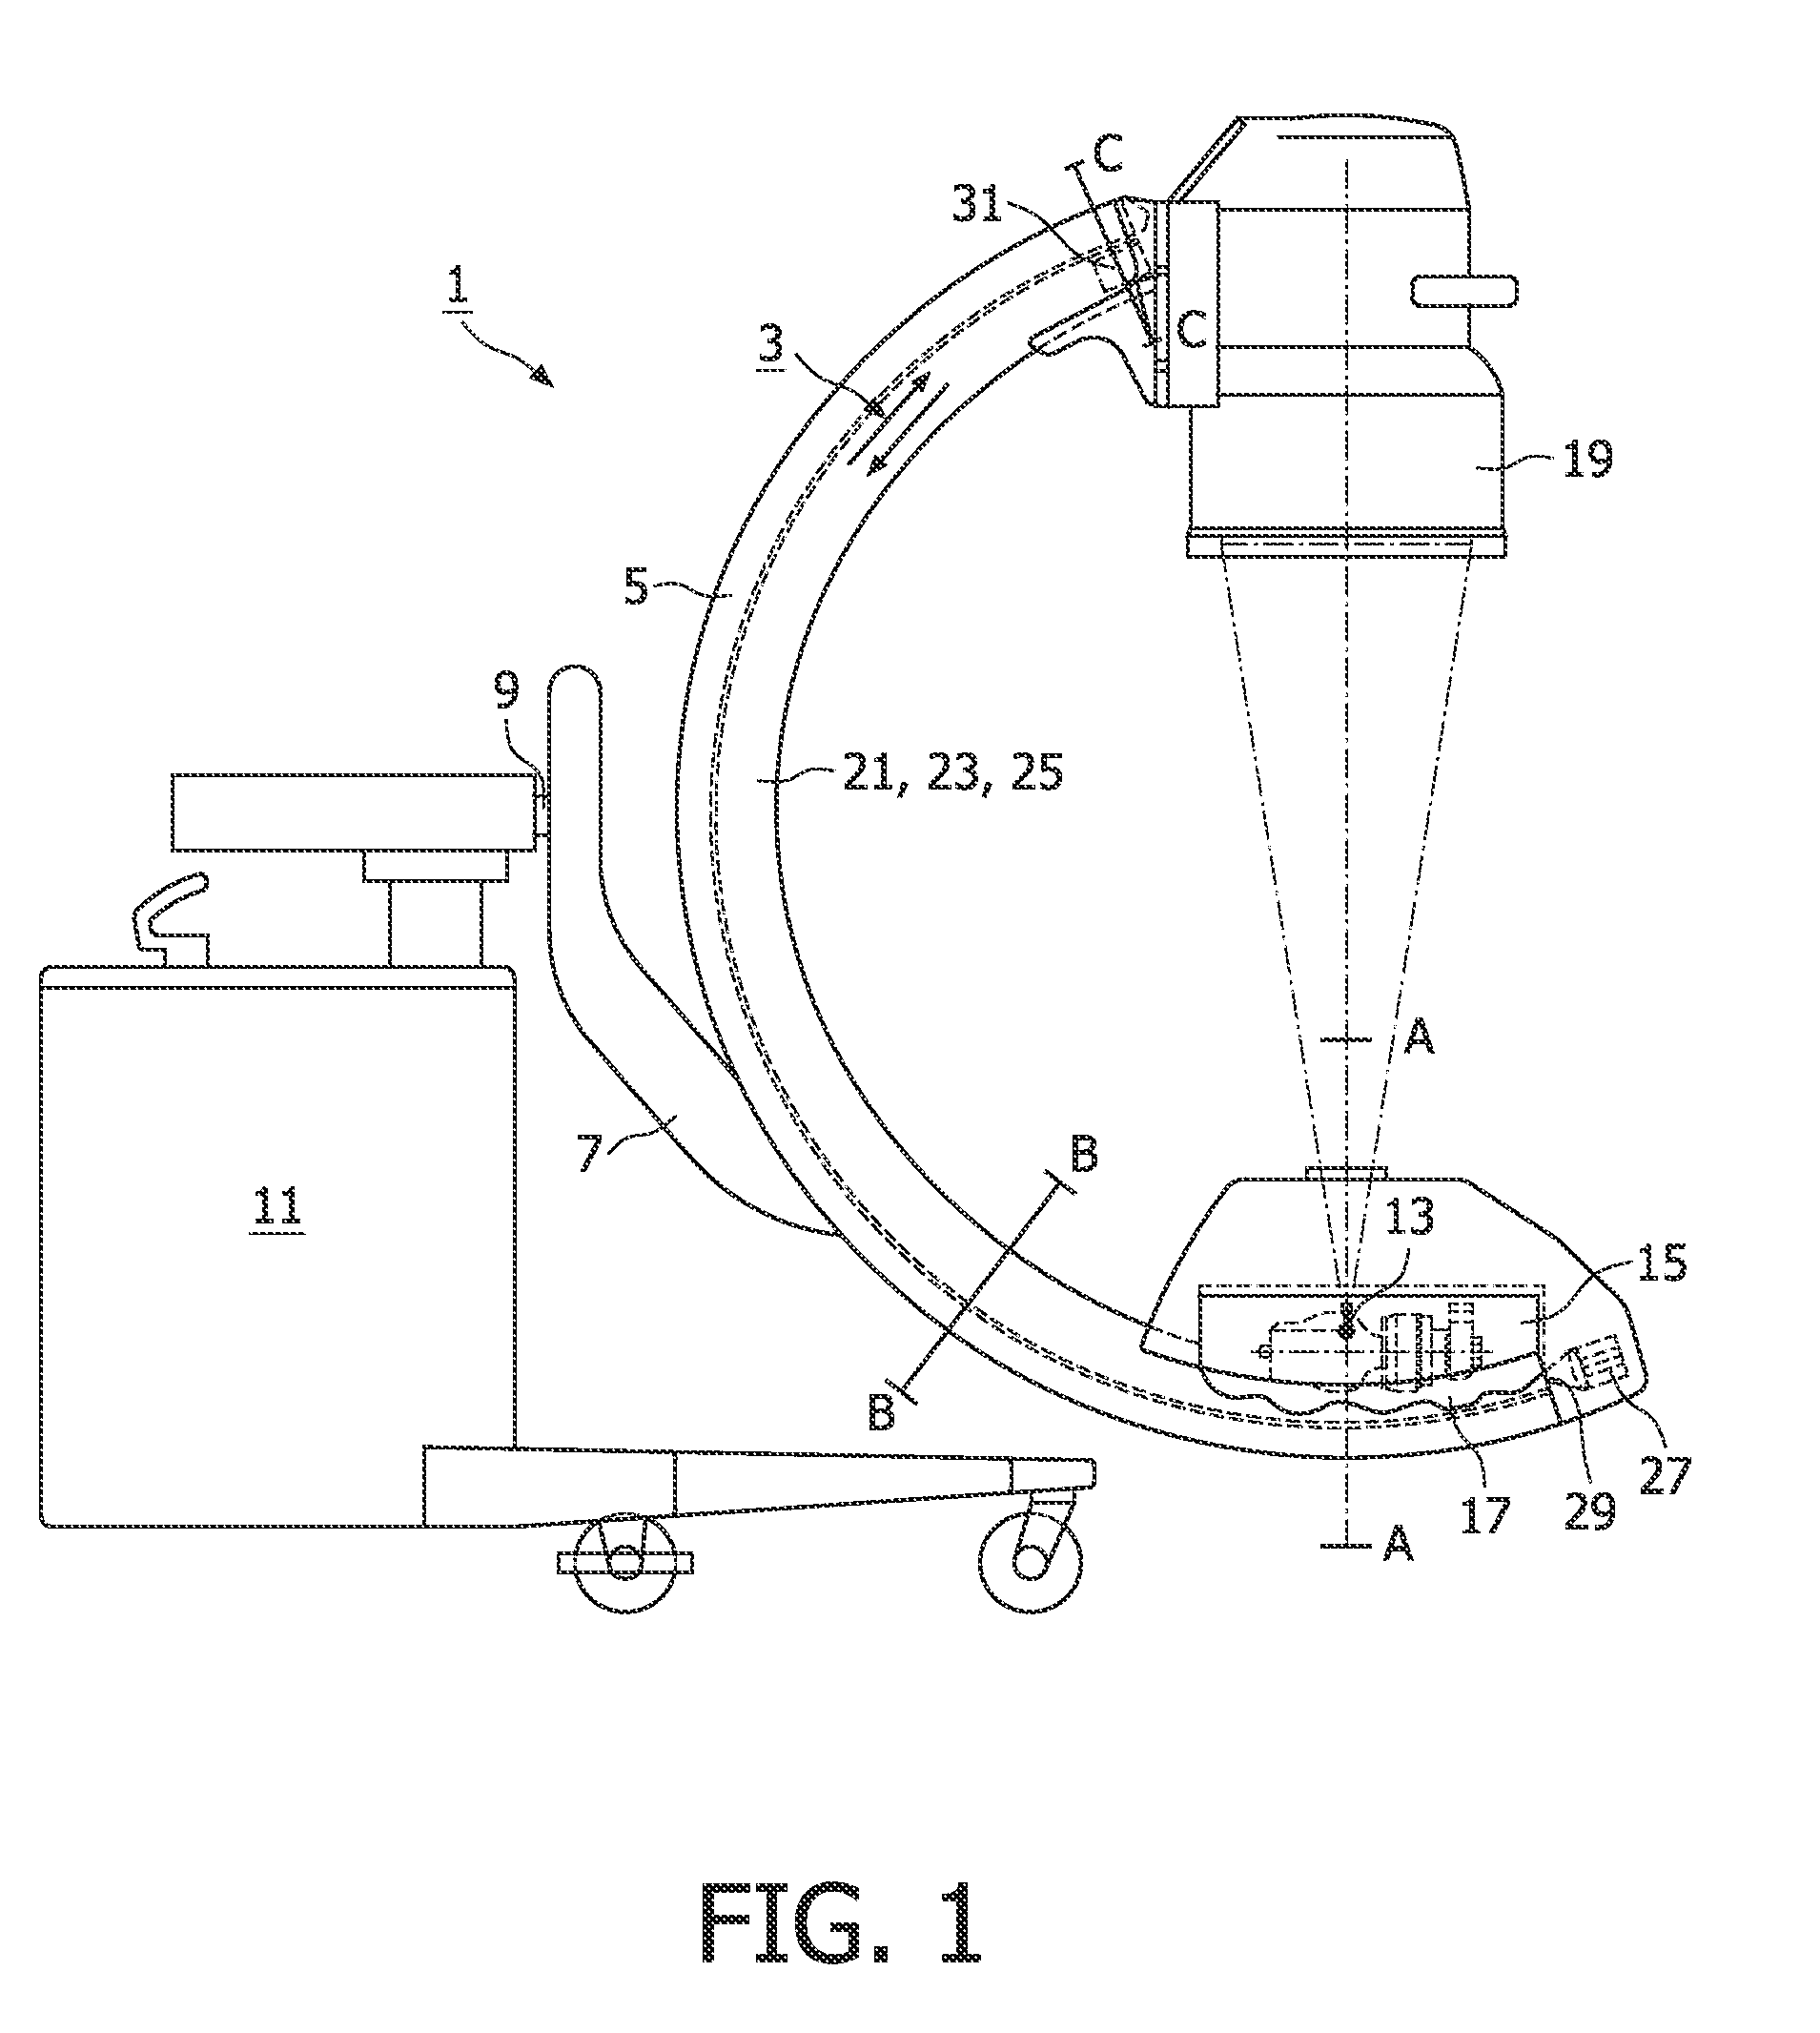 Medical diagnostic x-ray apparatus provided with a cooling device